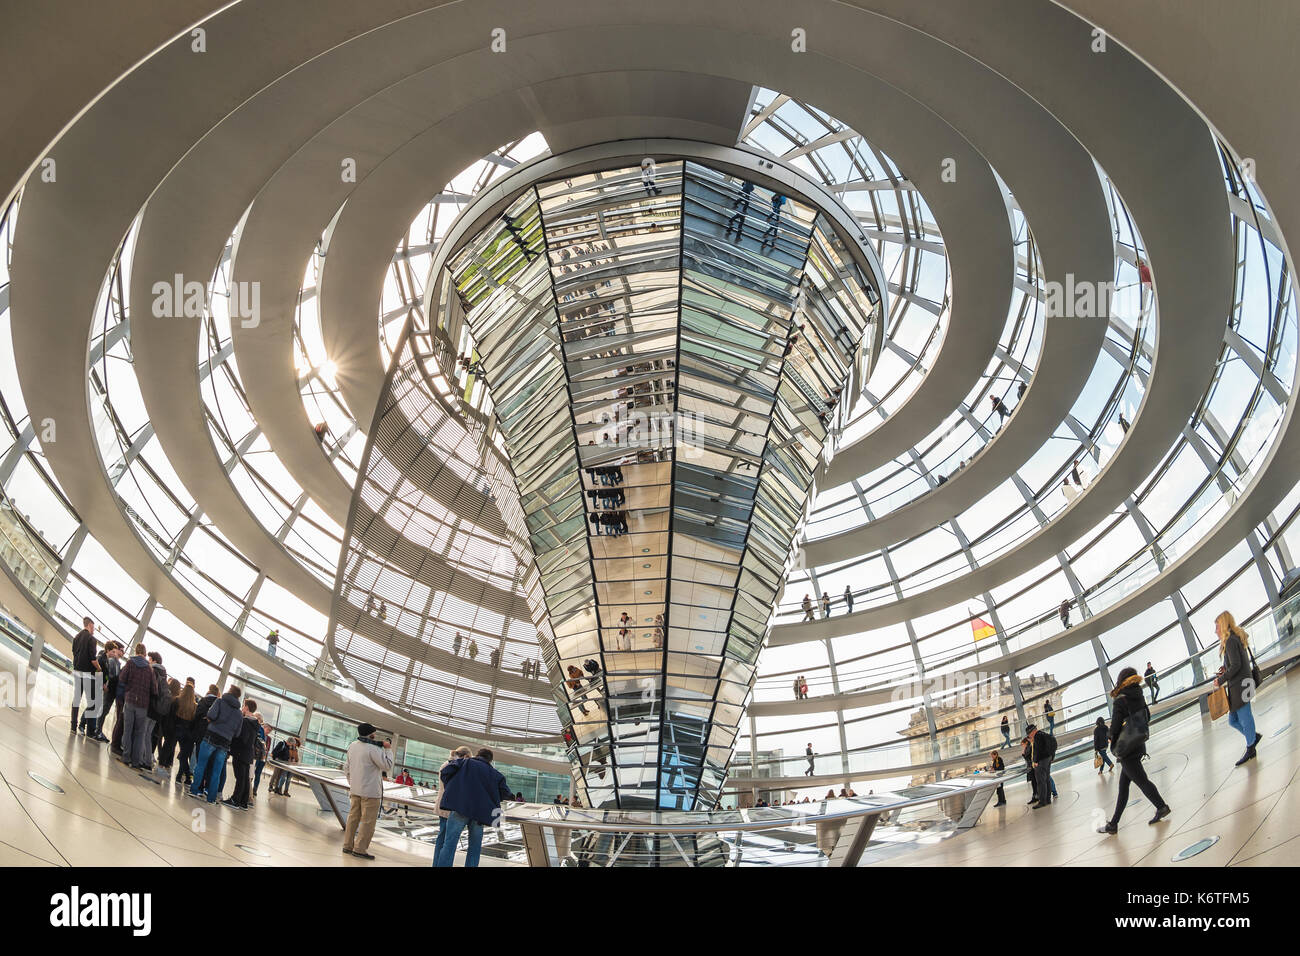 BERLIN, GERMANY - MAY 10, 2017: Tourist inside Berlin Reichstag (Bundestag) glass dome, Berlin, Germany Stock Photo